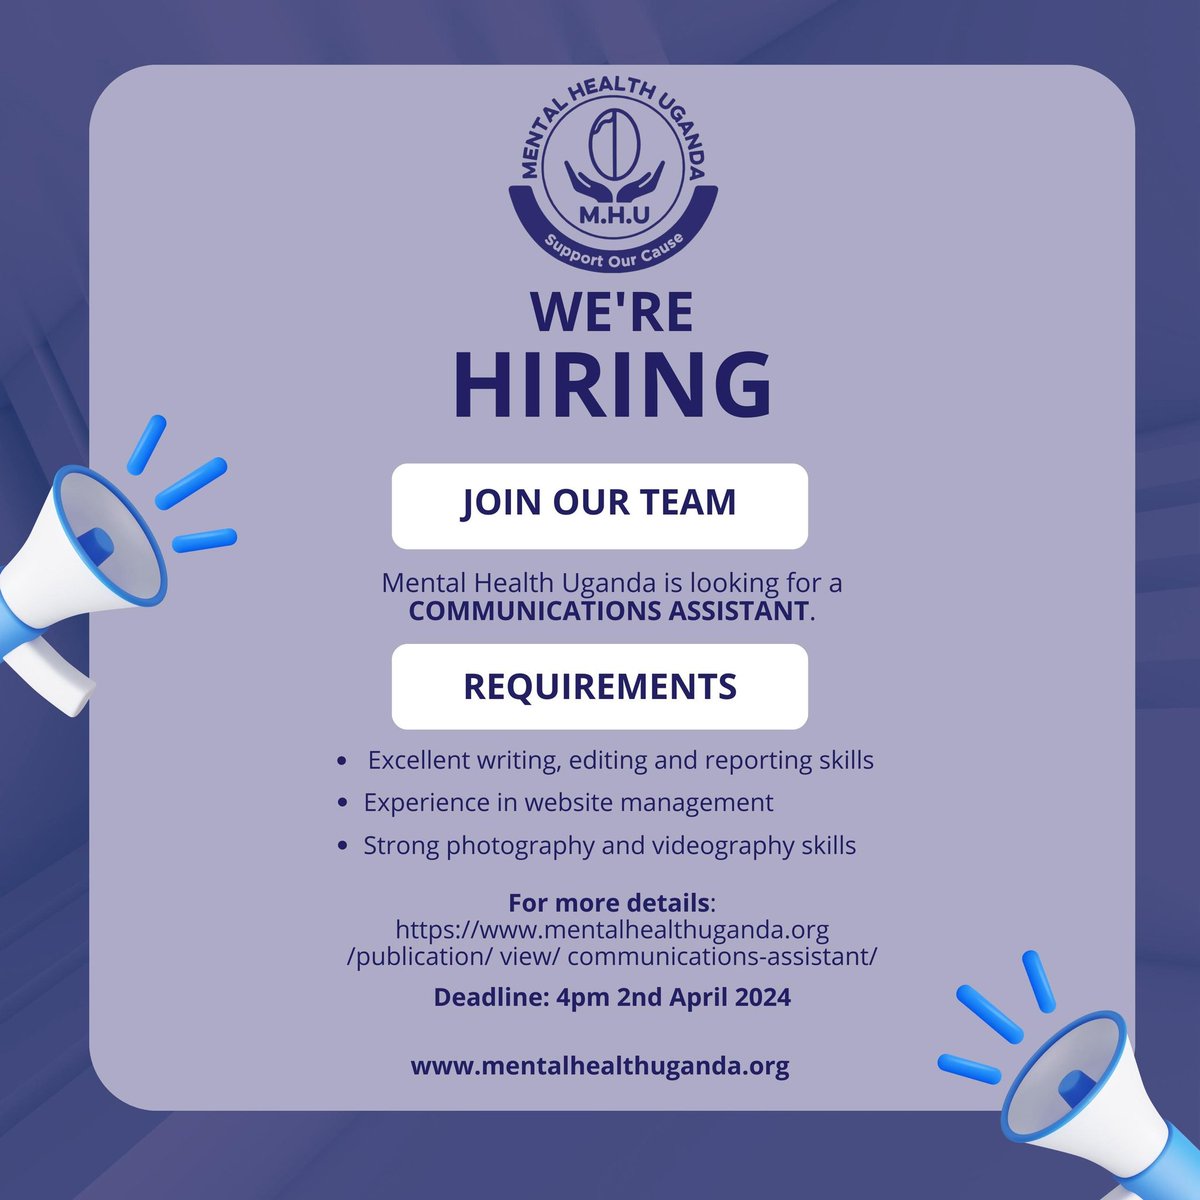 #MotivationMonday Reminder that the deadline for the communications assistant is today Tuesday 2nd April 2024 at 4pm EAT. Incase youre interested here's your chance to apply. #Deadline